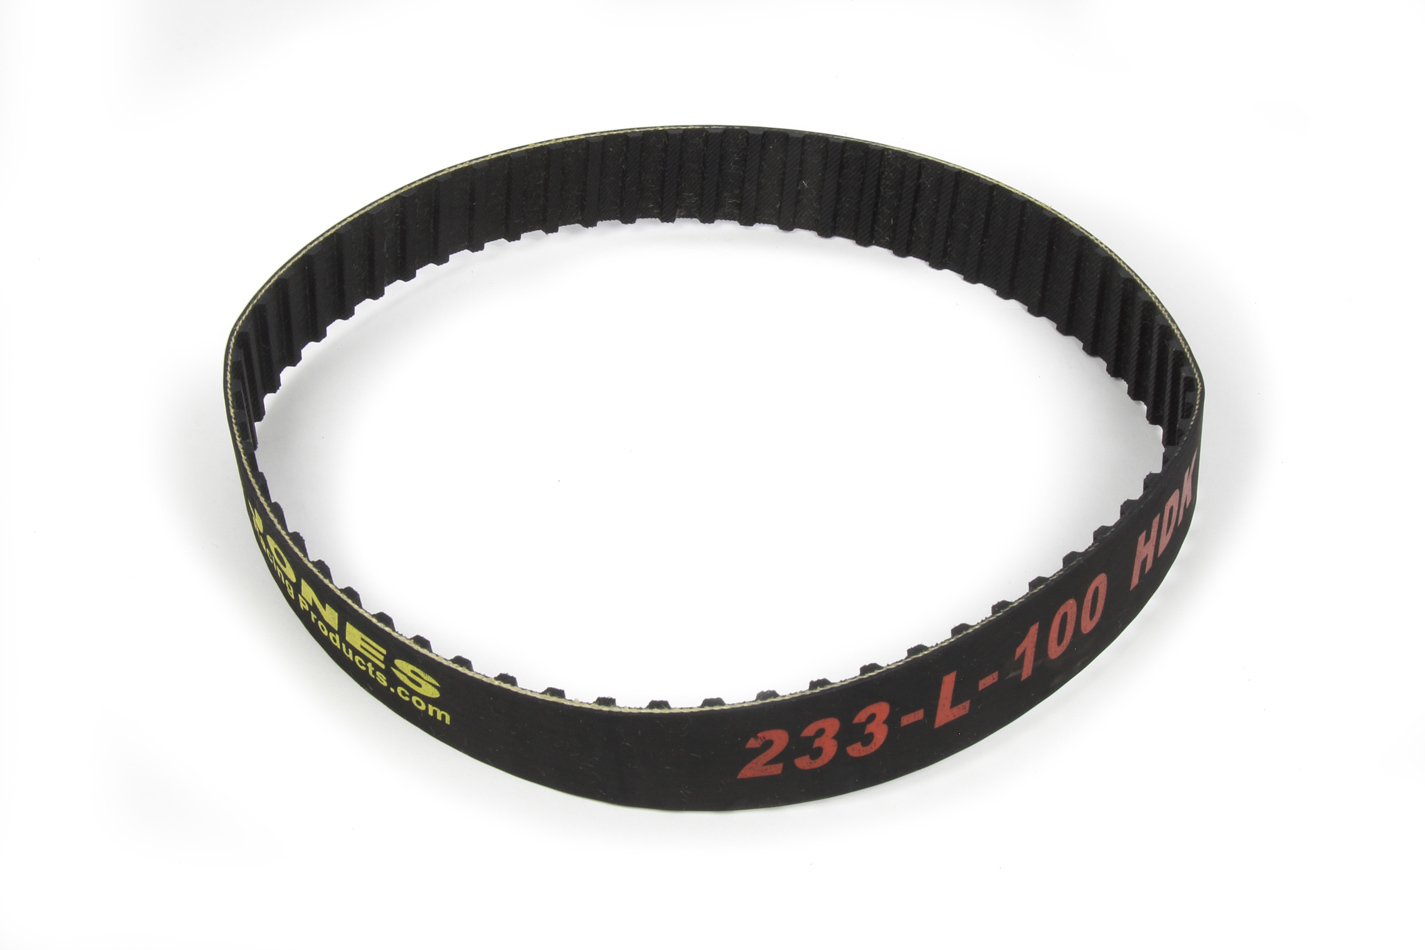 Jones Racing Products 760-20HD HTD Drive Belt, 29.290 in Long, 20 mm Wide, 8 mm Pitch, Each